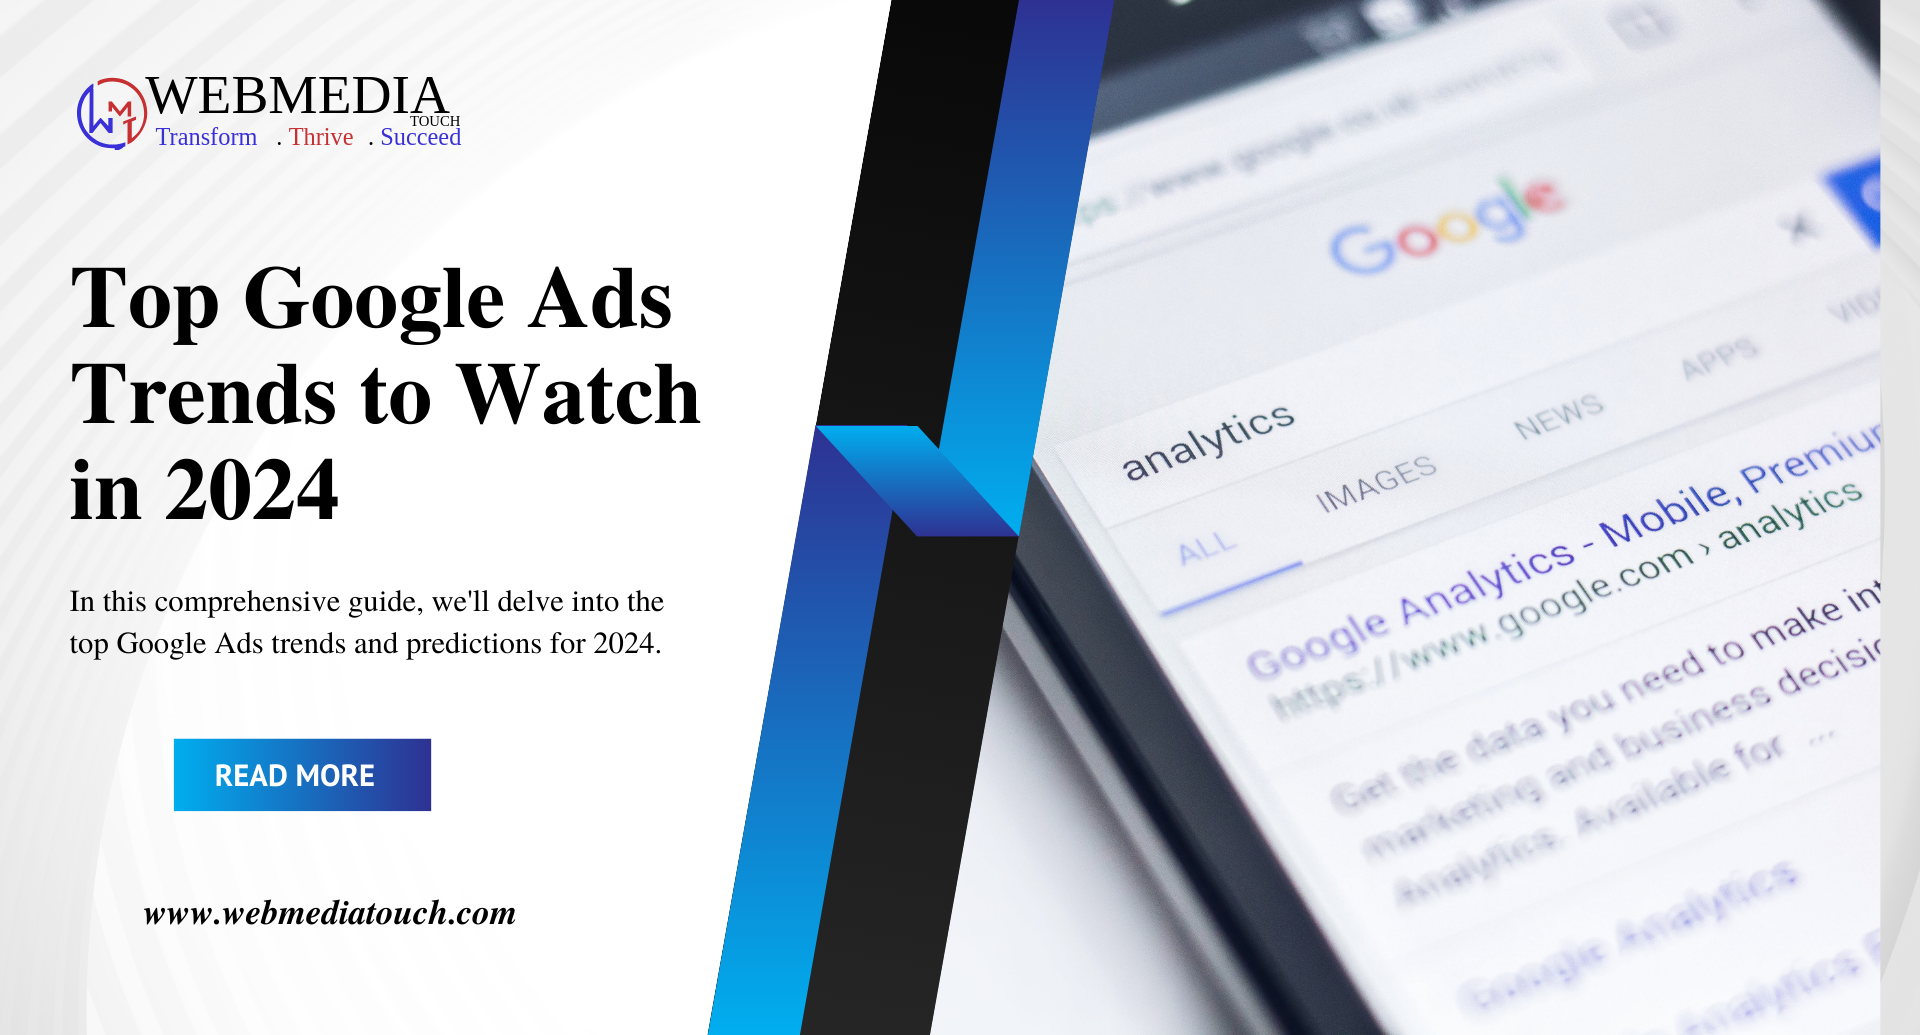 Top Google Ads Trends to Watch in 2024